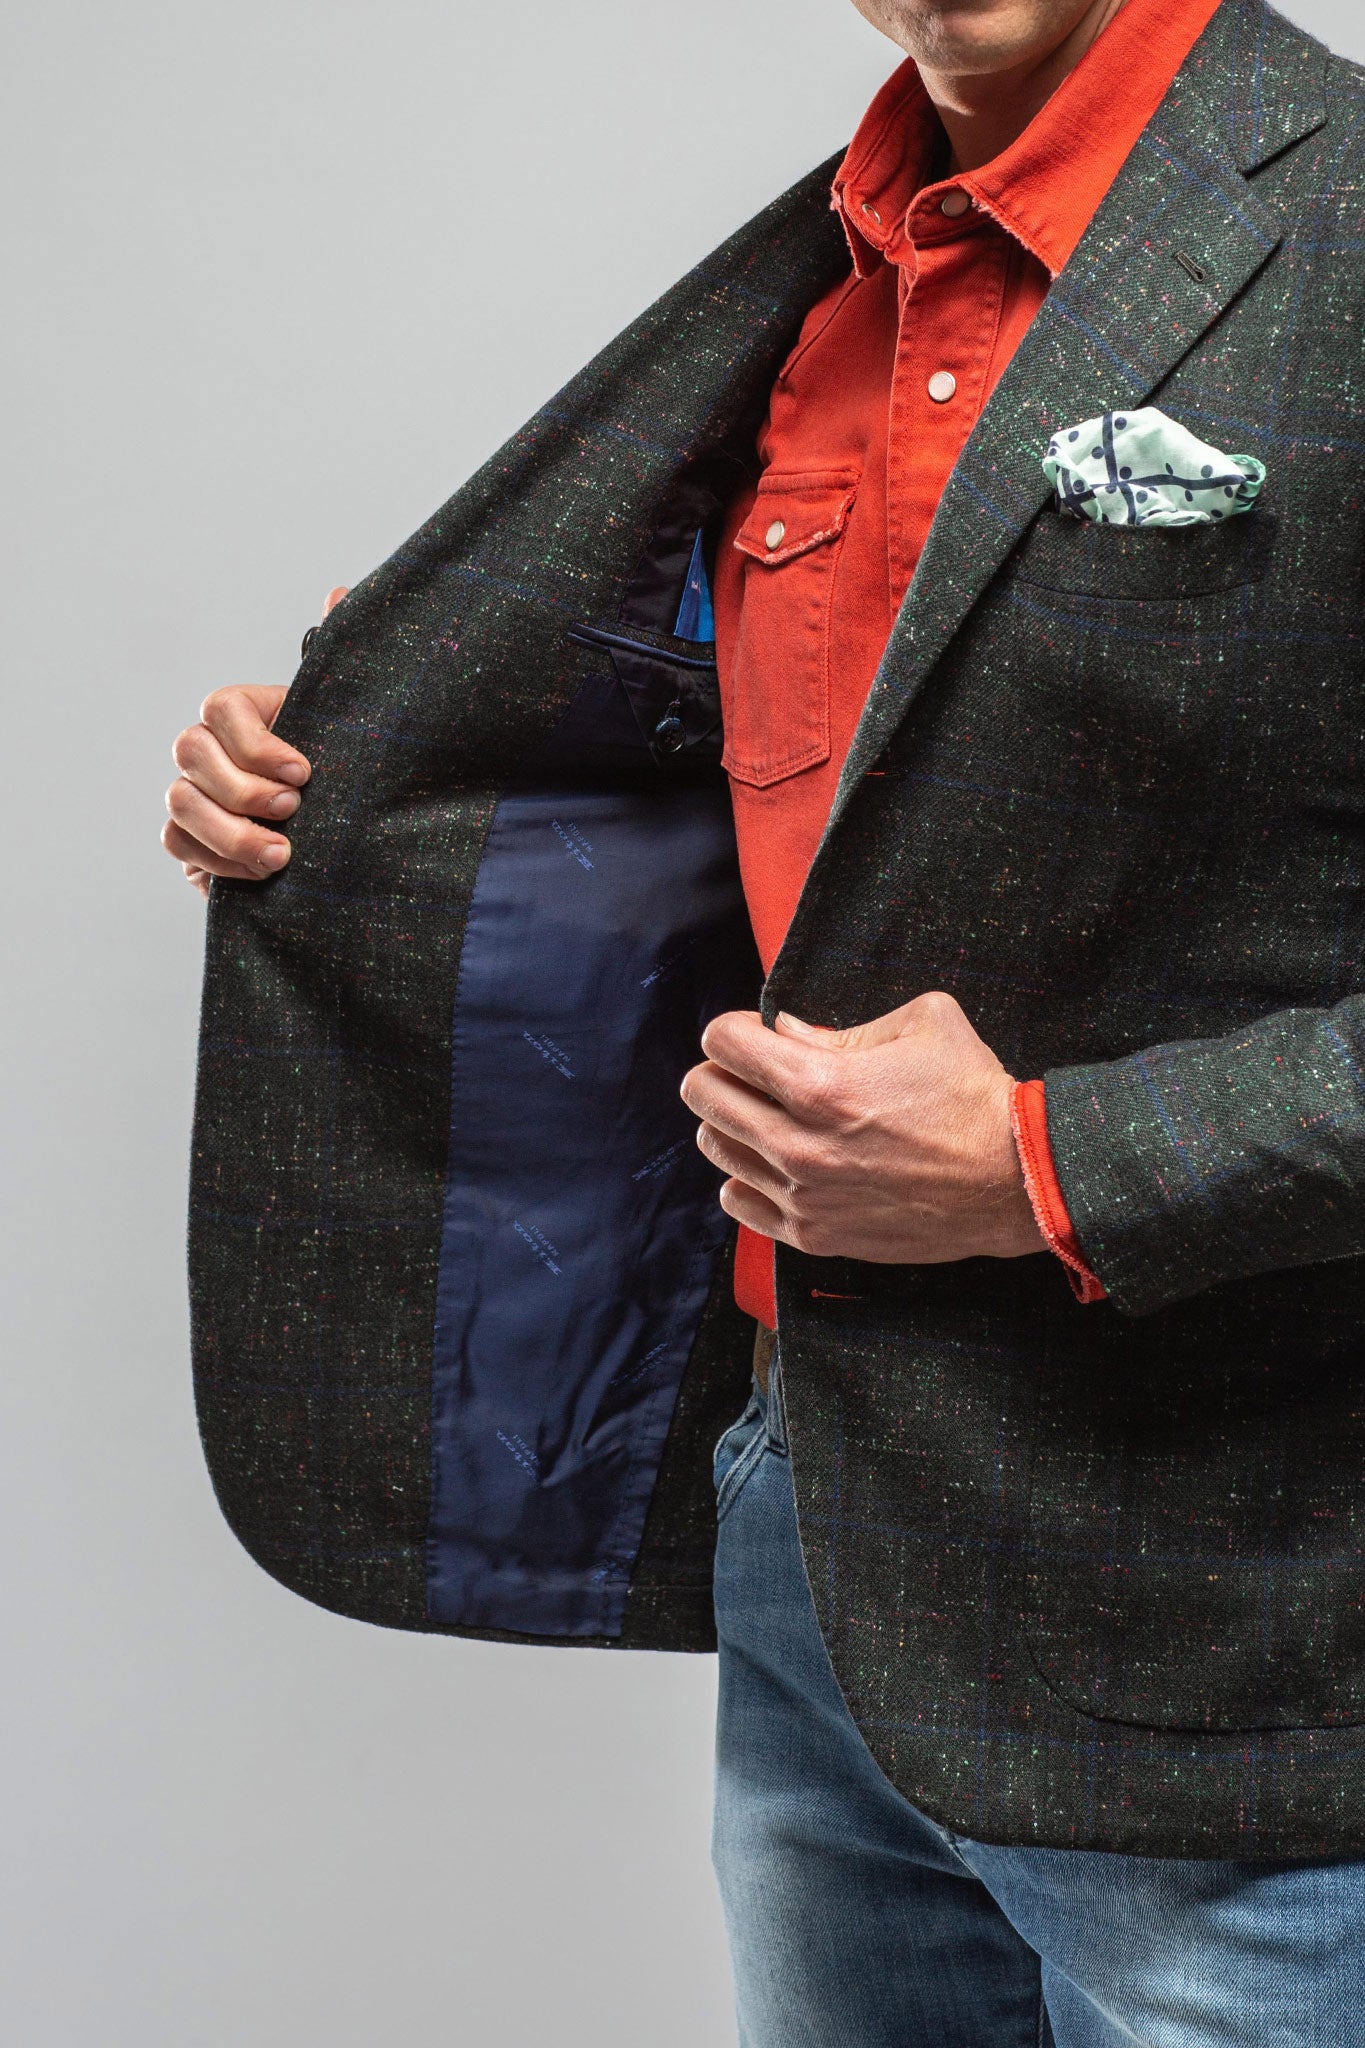 Meloni Cashmere Jacket In Green With Multi Donegal | Mens - Tailored - Sport Coats | Kiton